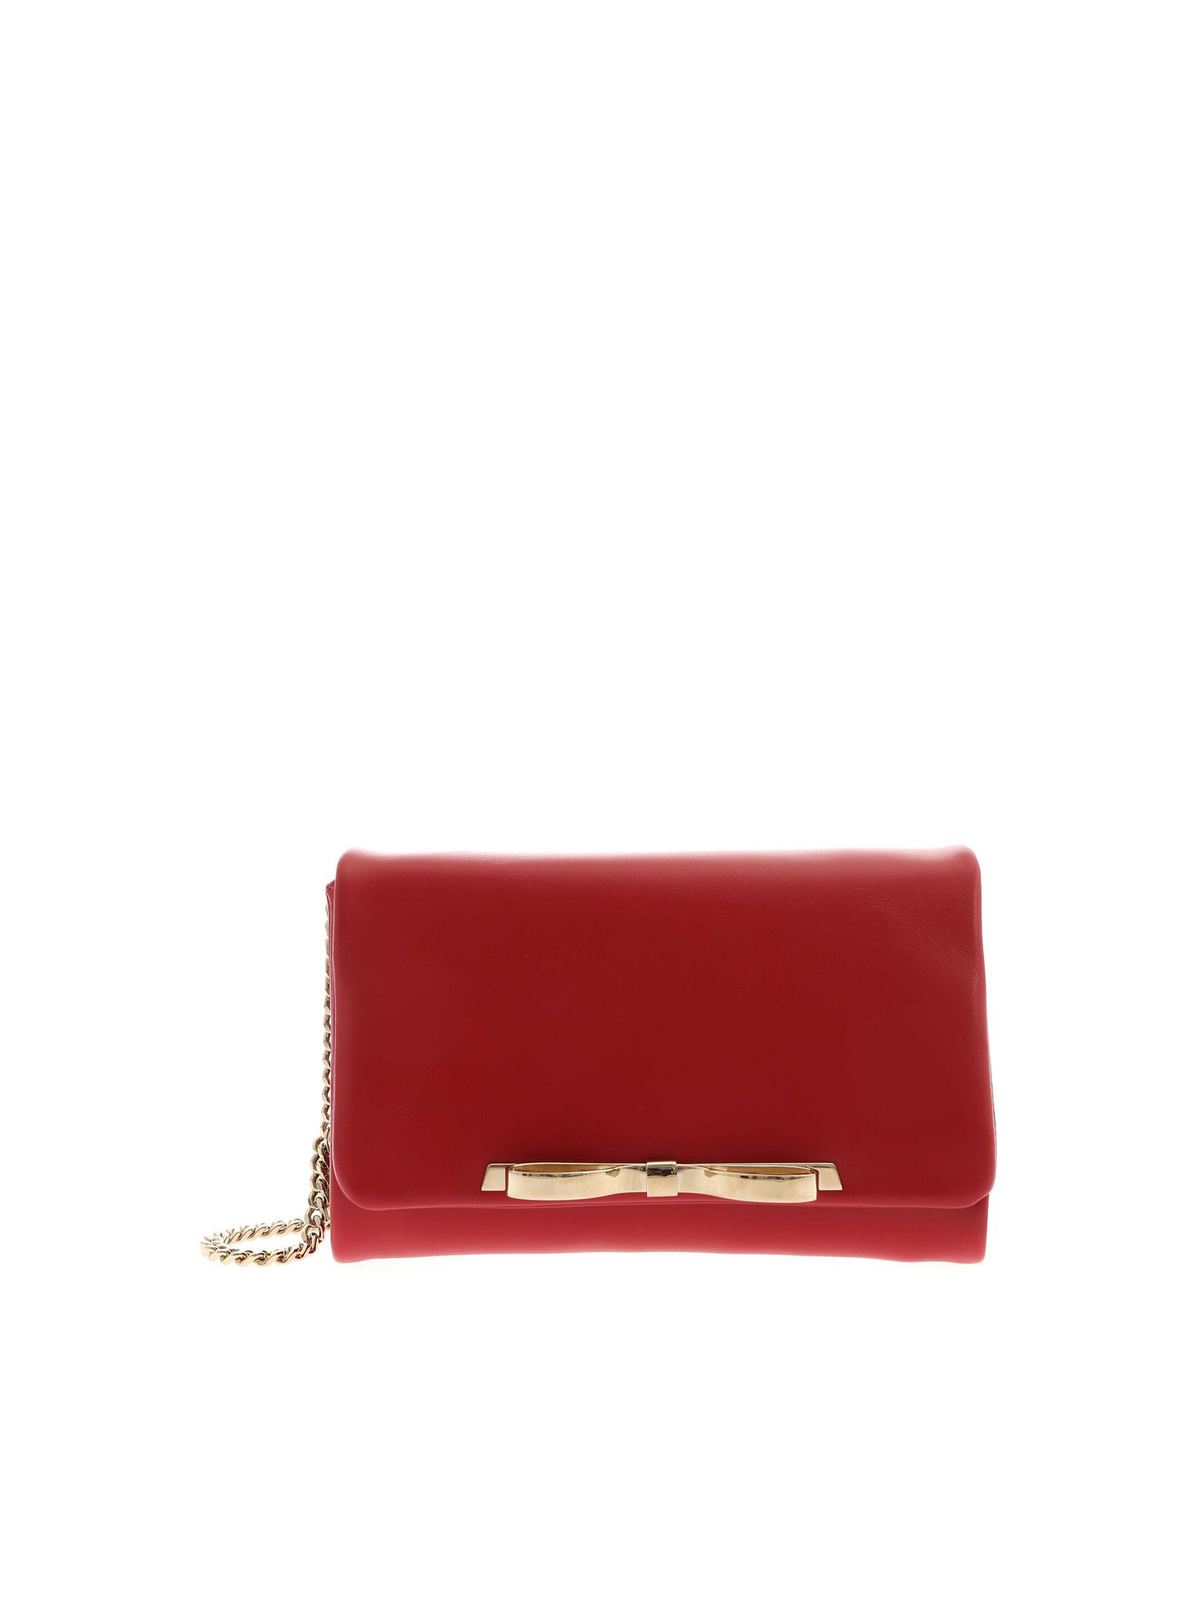 body bags Valentino Red Golden bow shoulder bag red -